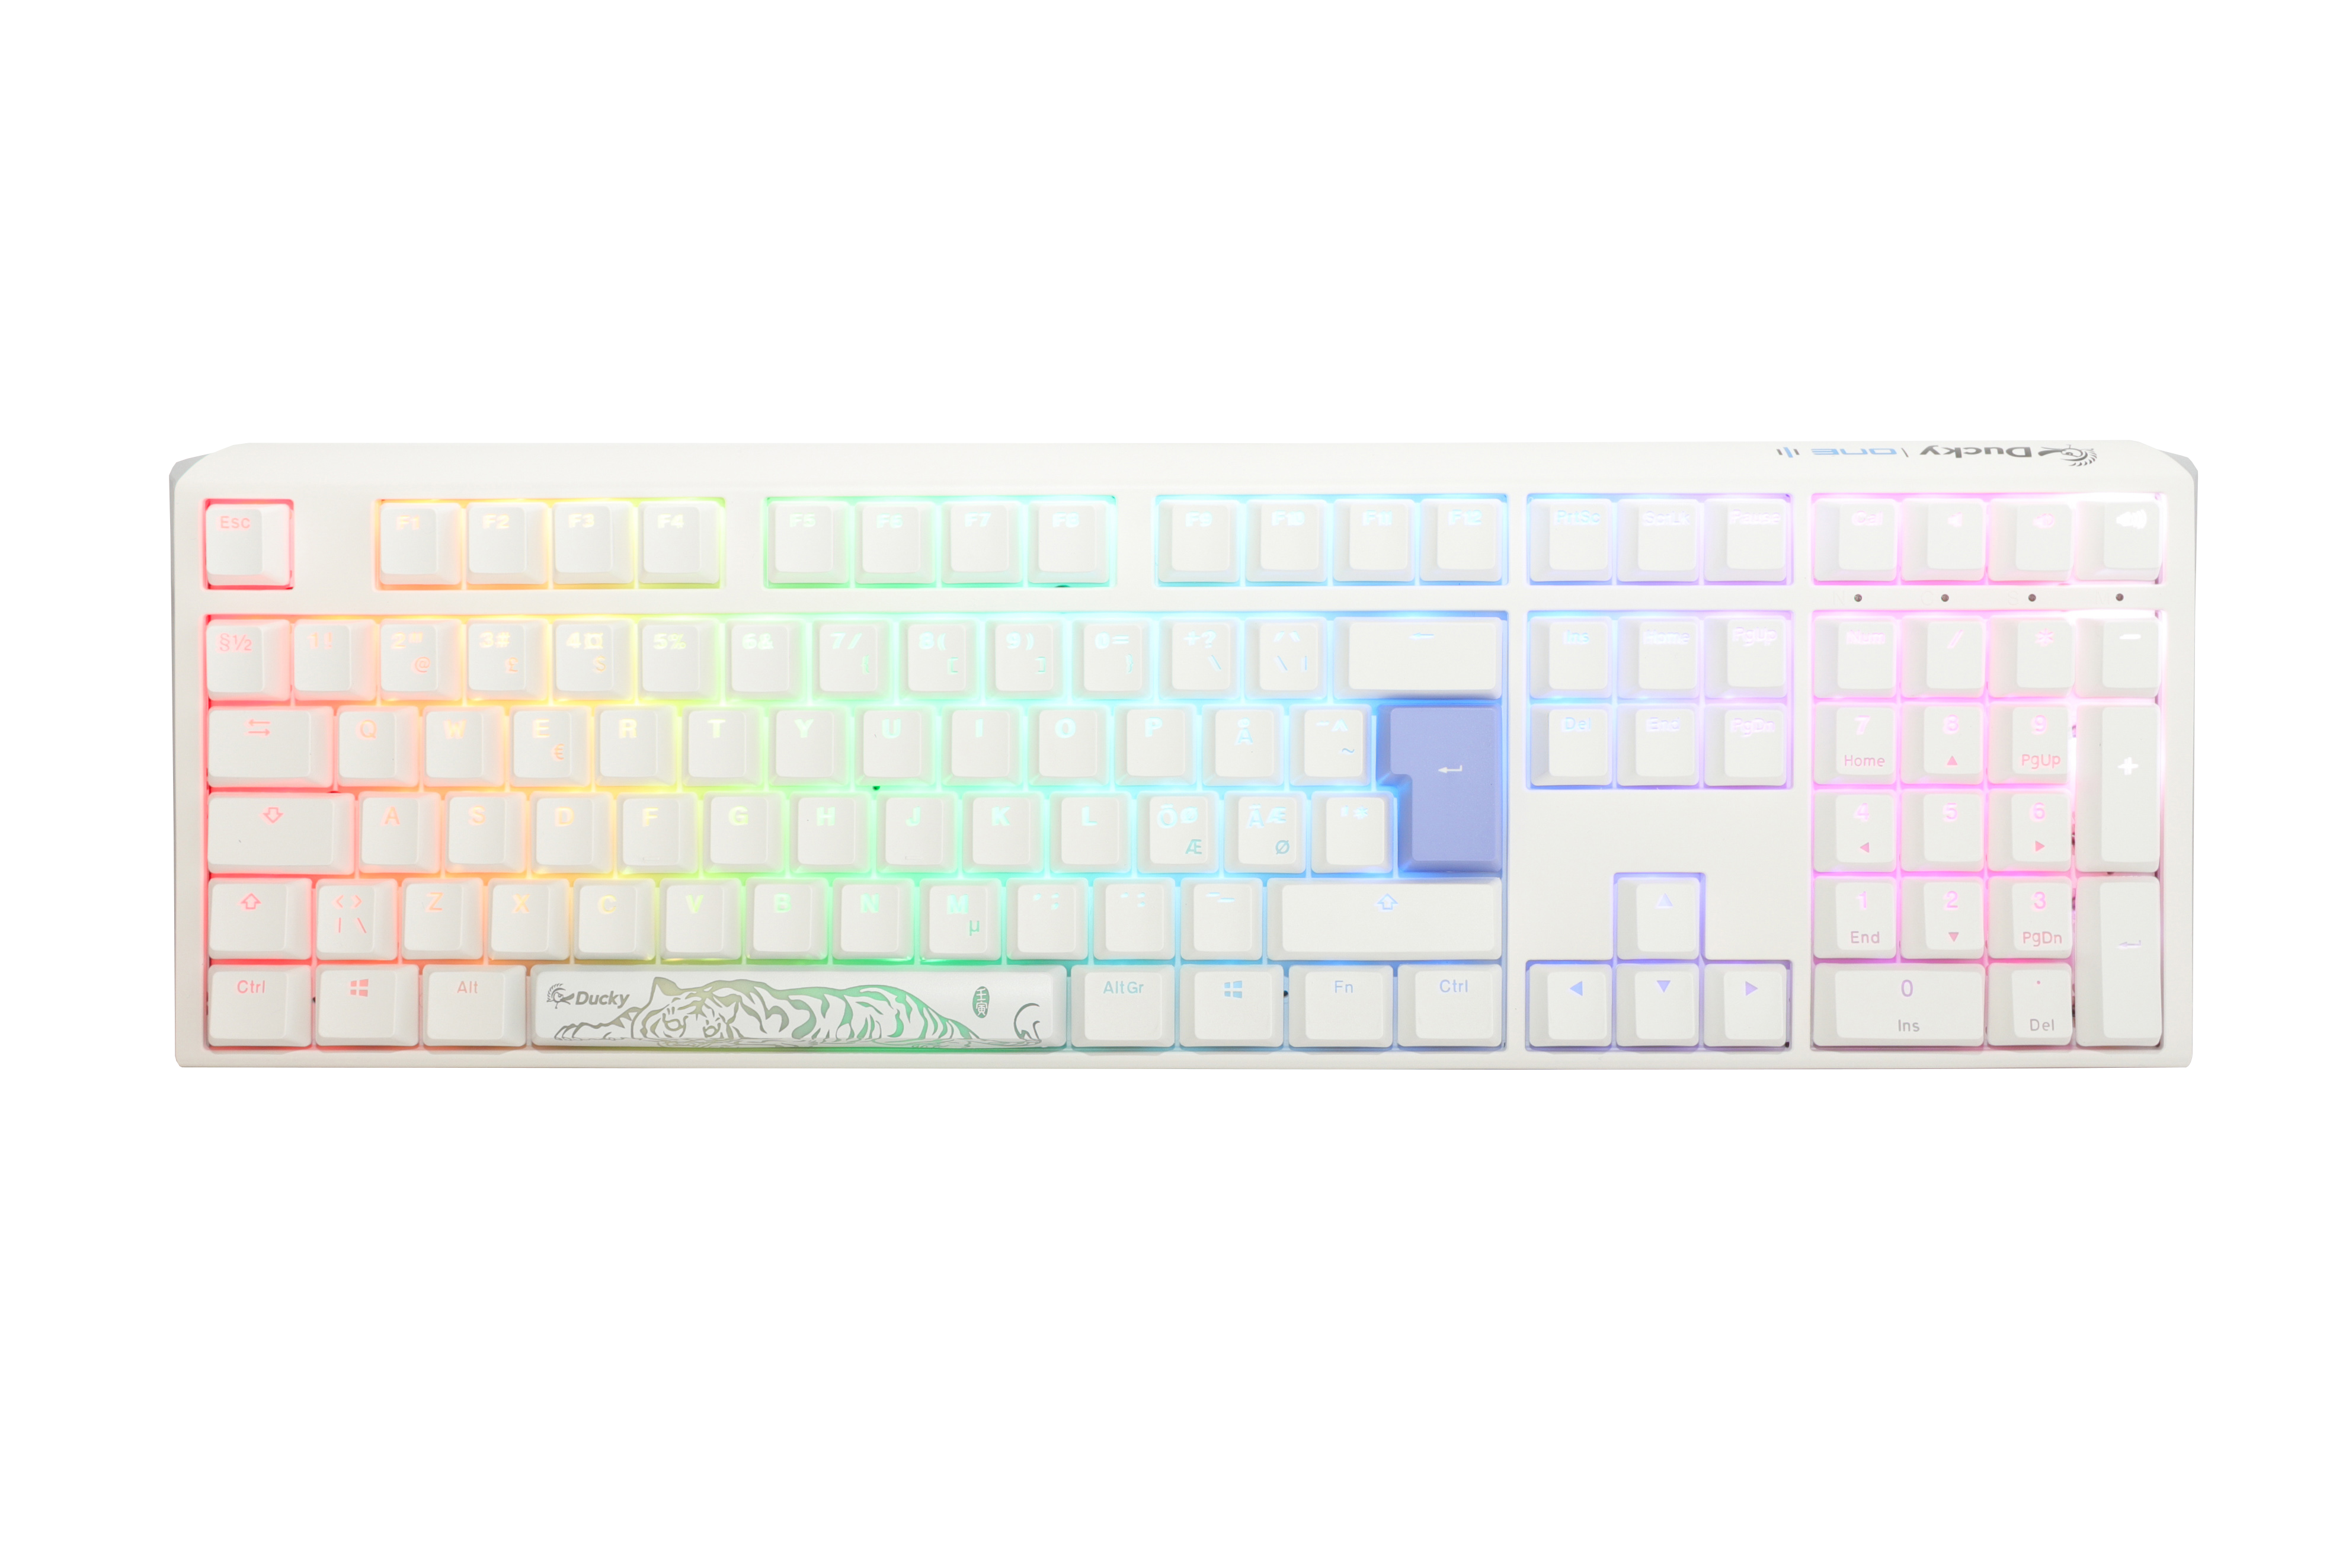 A Ducky mechanical keyboard with multicolored backlit keys, ranging from red through the spectrum to purple, featuring double-shot PBT keycaps and a custom white casing with a floral design on the bottom right.